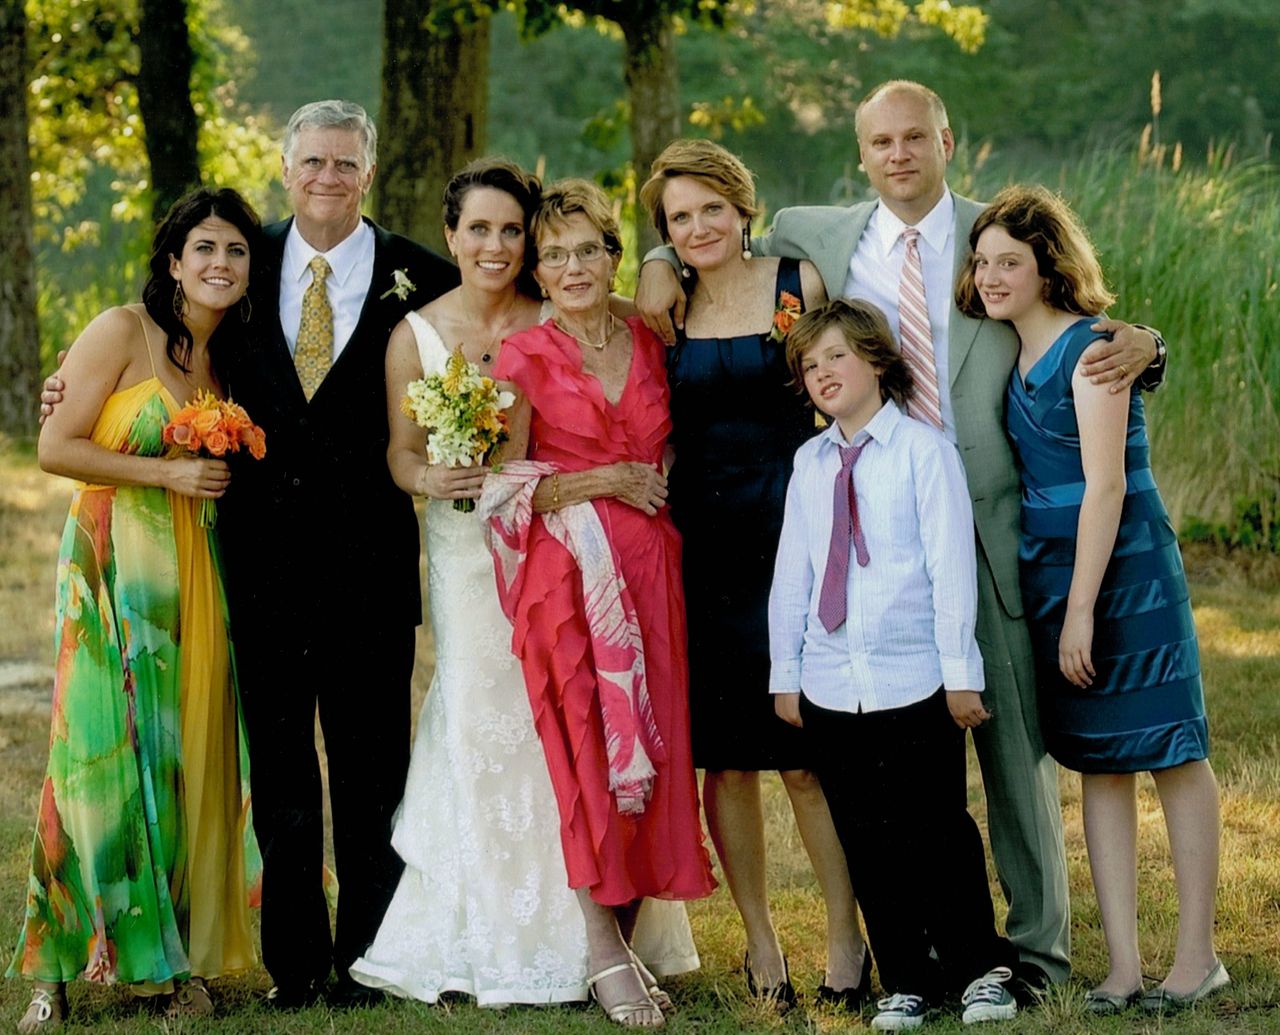 My family at my sister's wedding in June 2010. The fact that my mom is in the middle of the family is not surprising, given the matriarch she was.